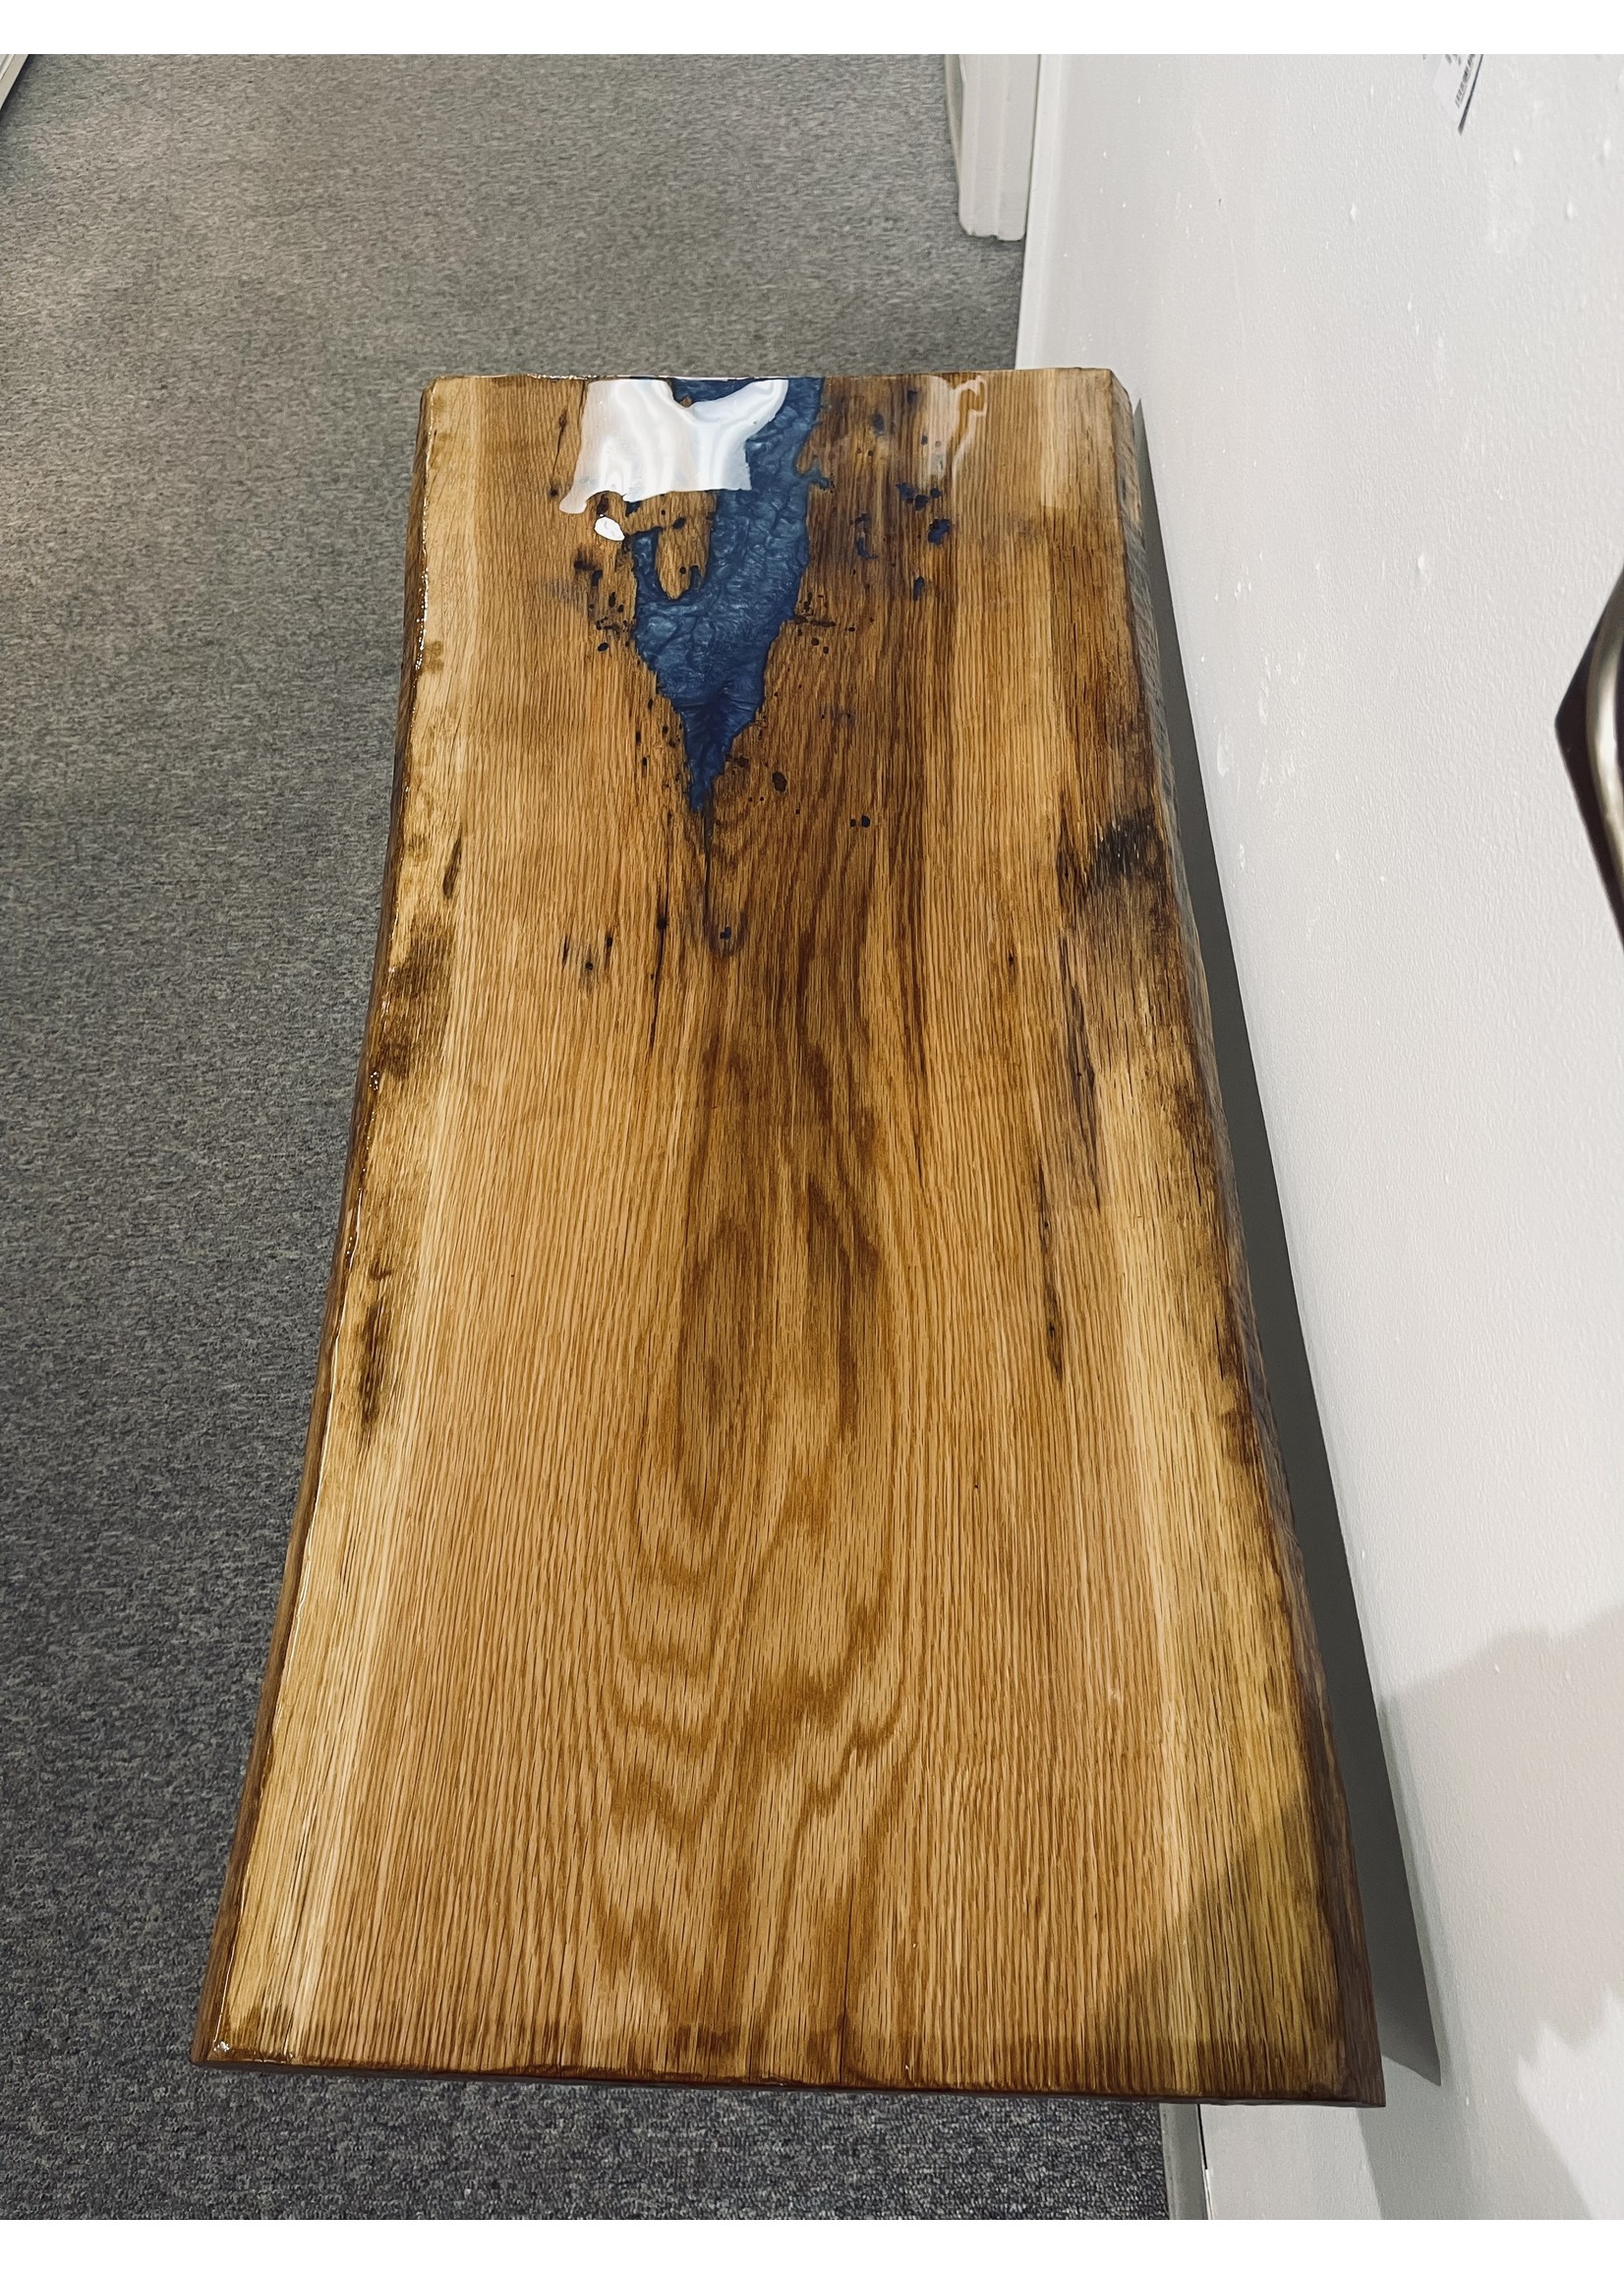 Mike Sexton MIKE SEXTON WHITE OAK RIVER TABLE  29 INCHES TALL 40 INCHES LONG